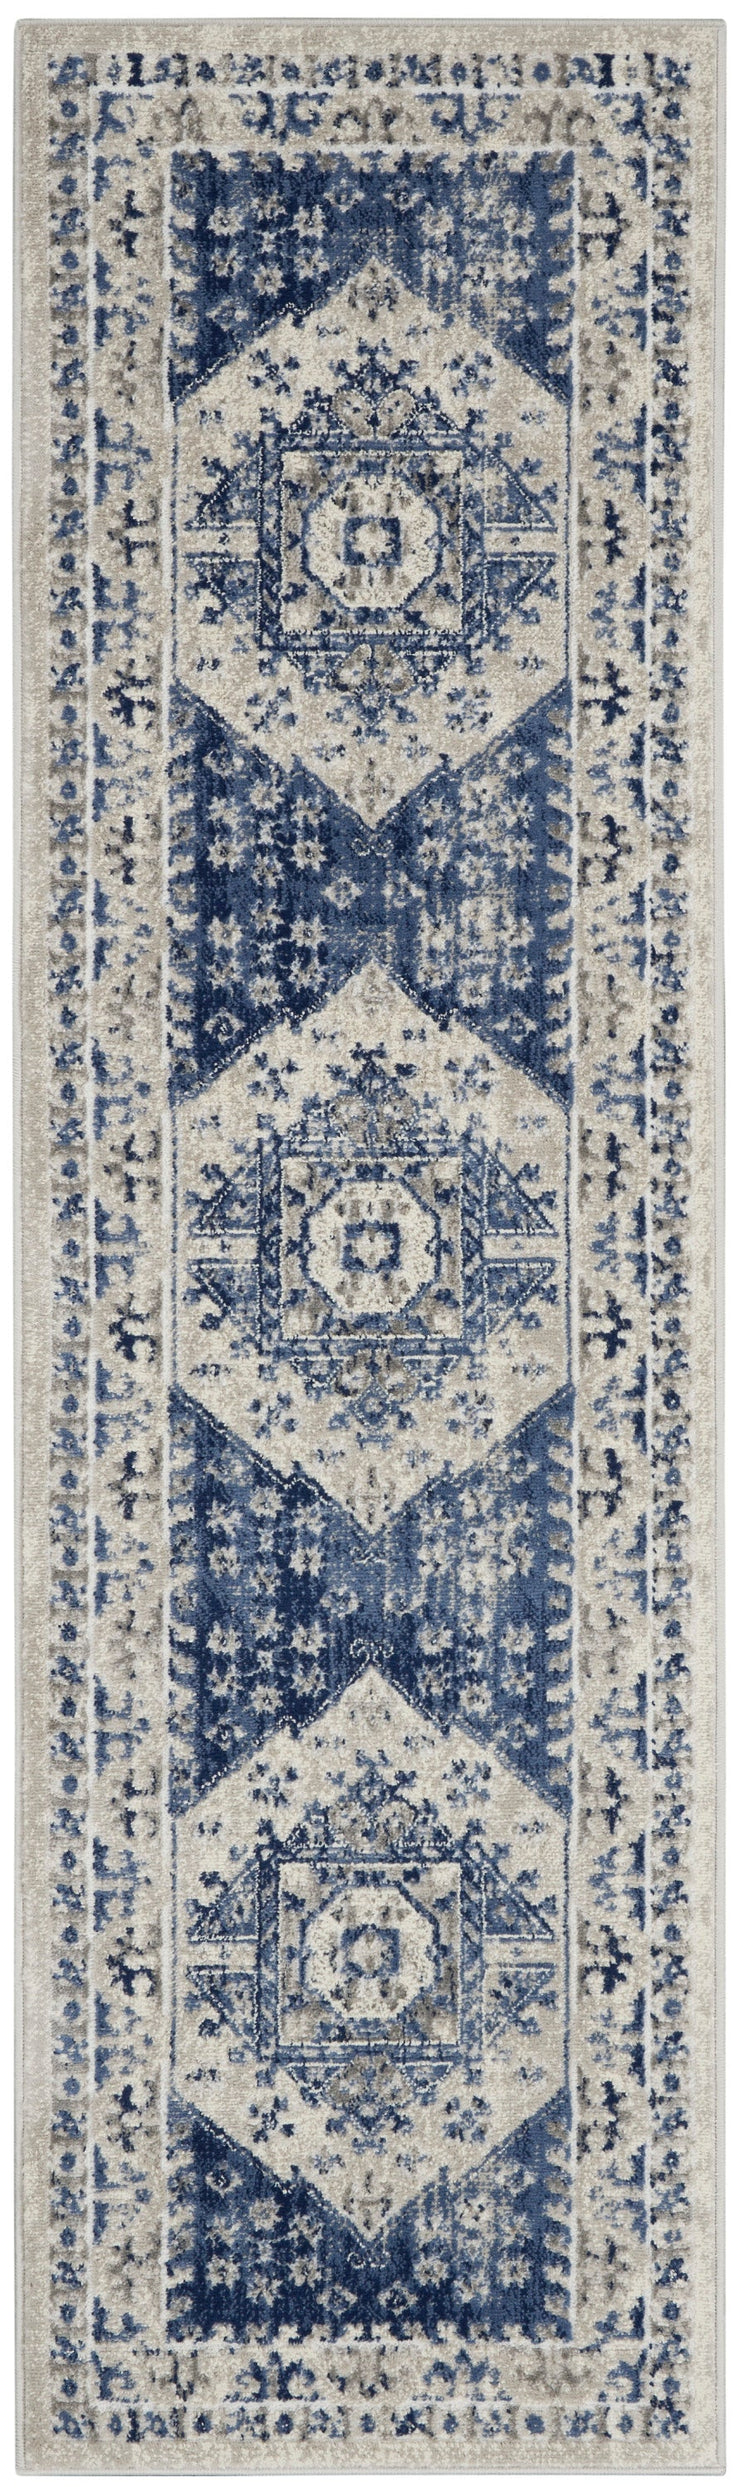 cyrus ivory blue rug by nourison 99446795854 redo 2